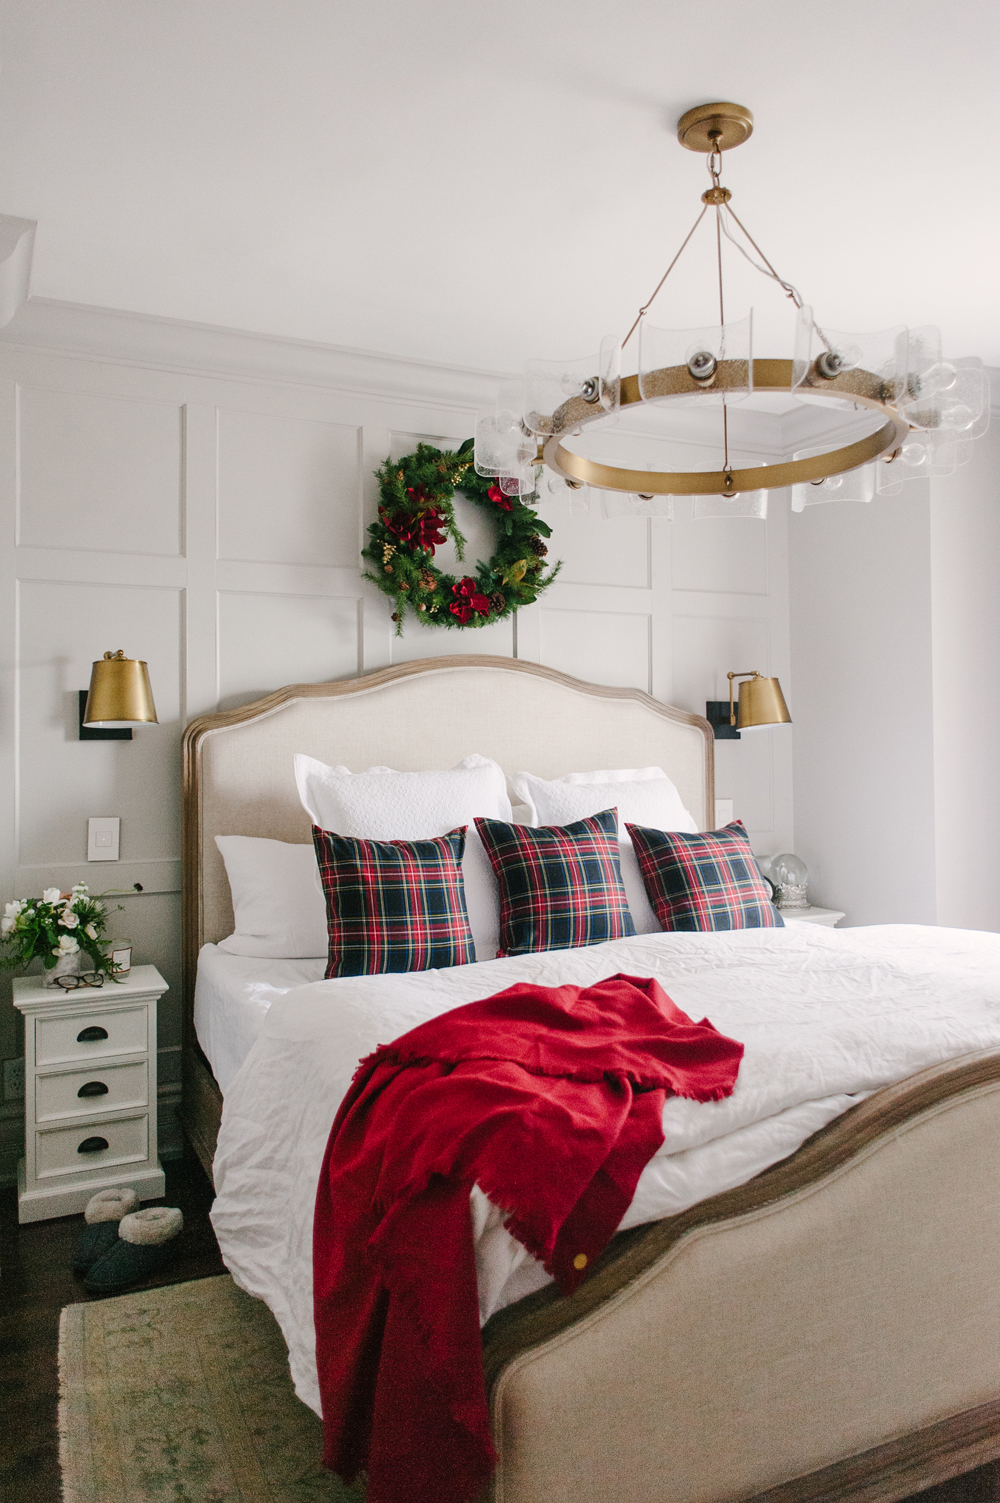 Bedroom with festive plaid pillows